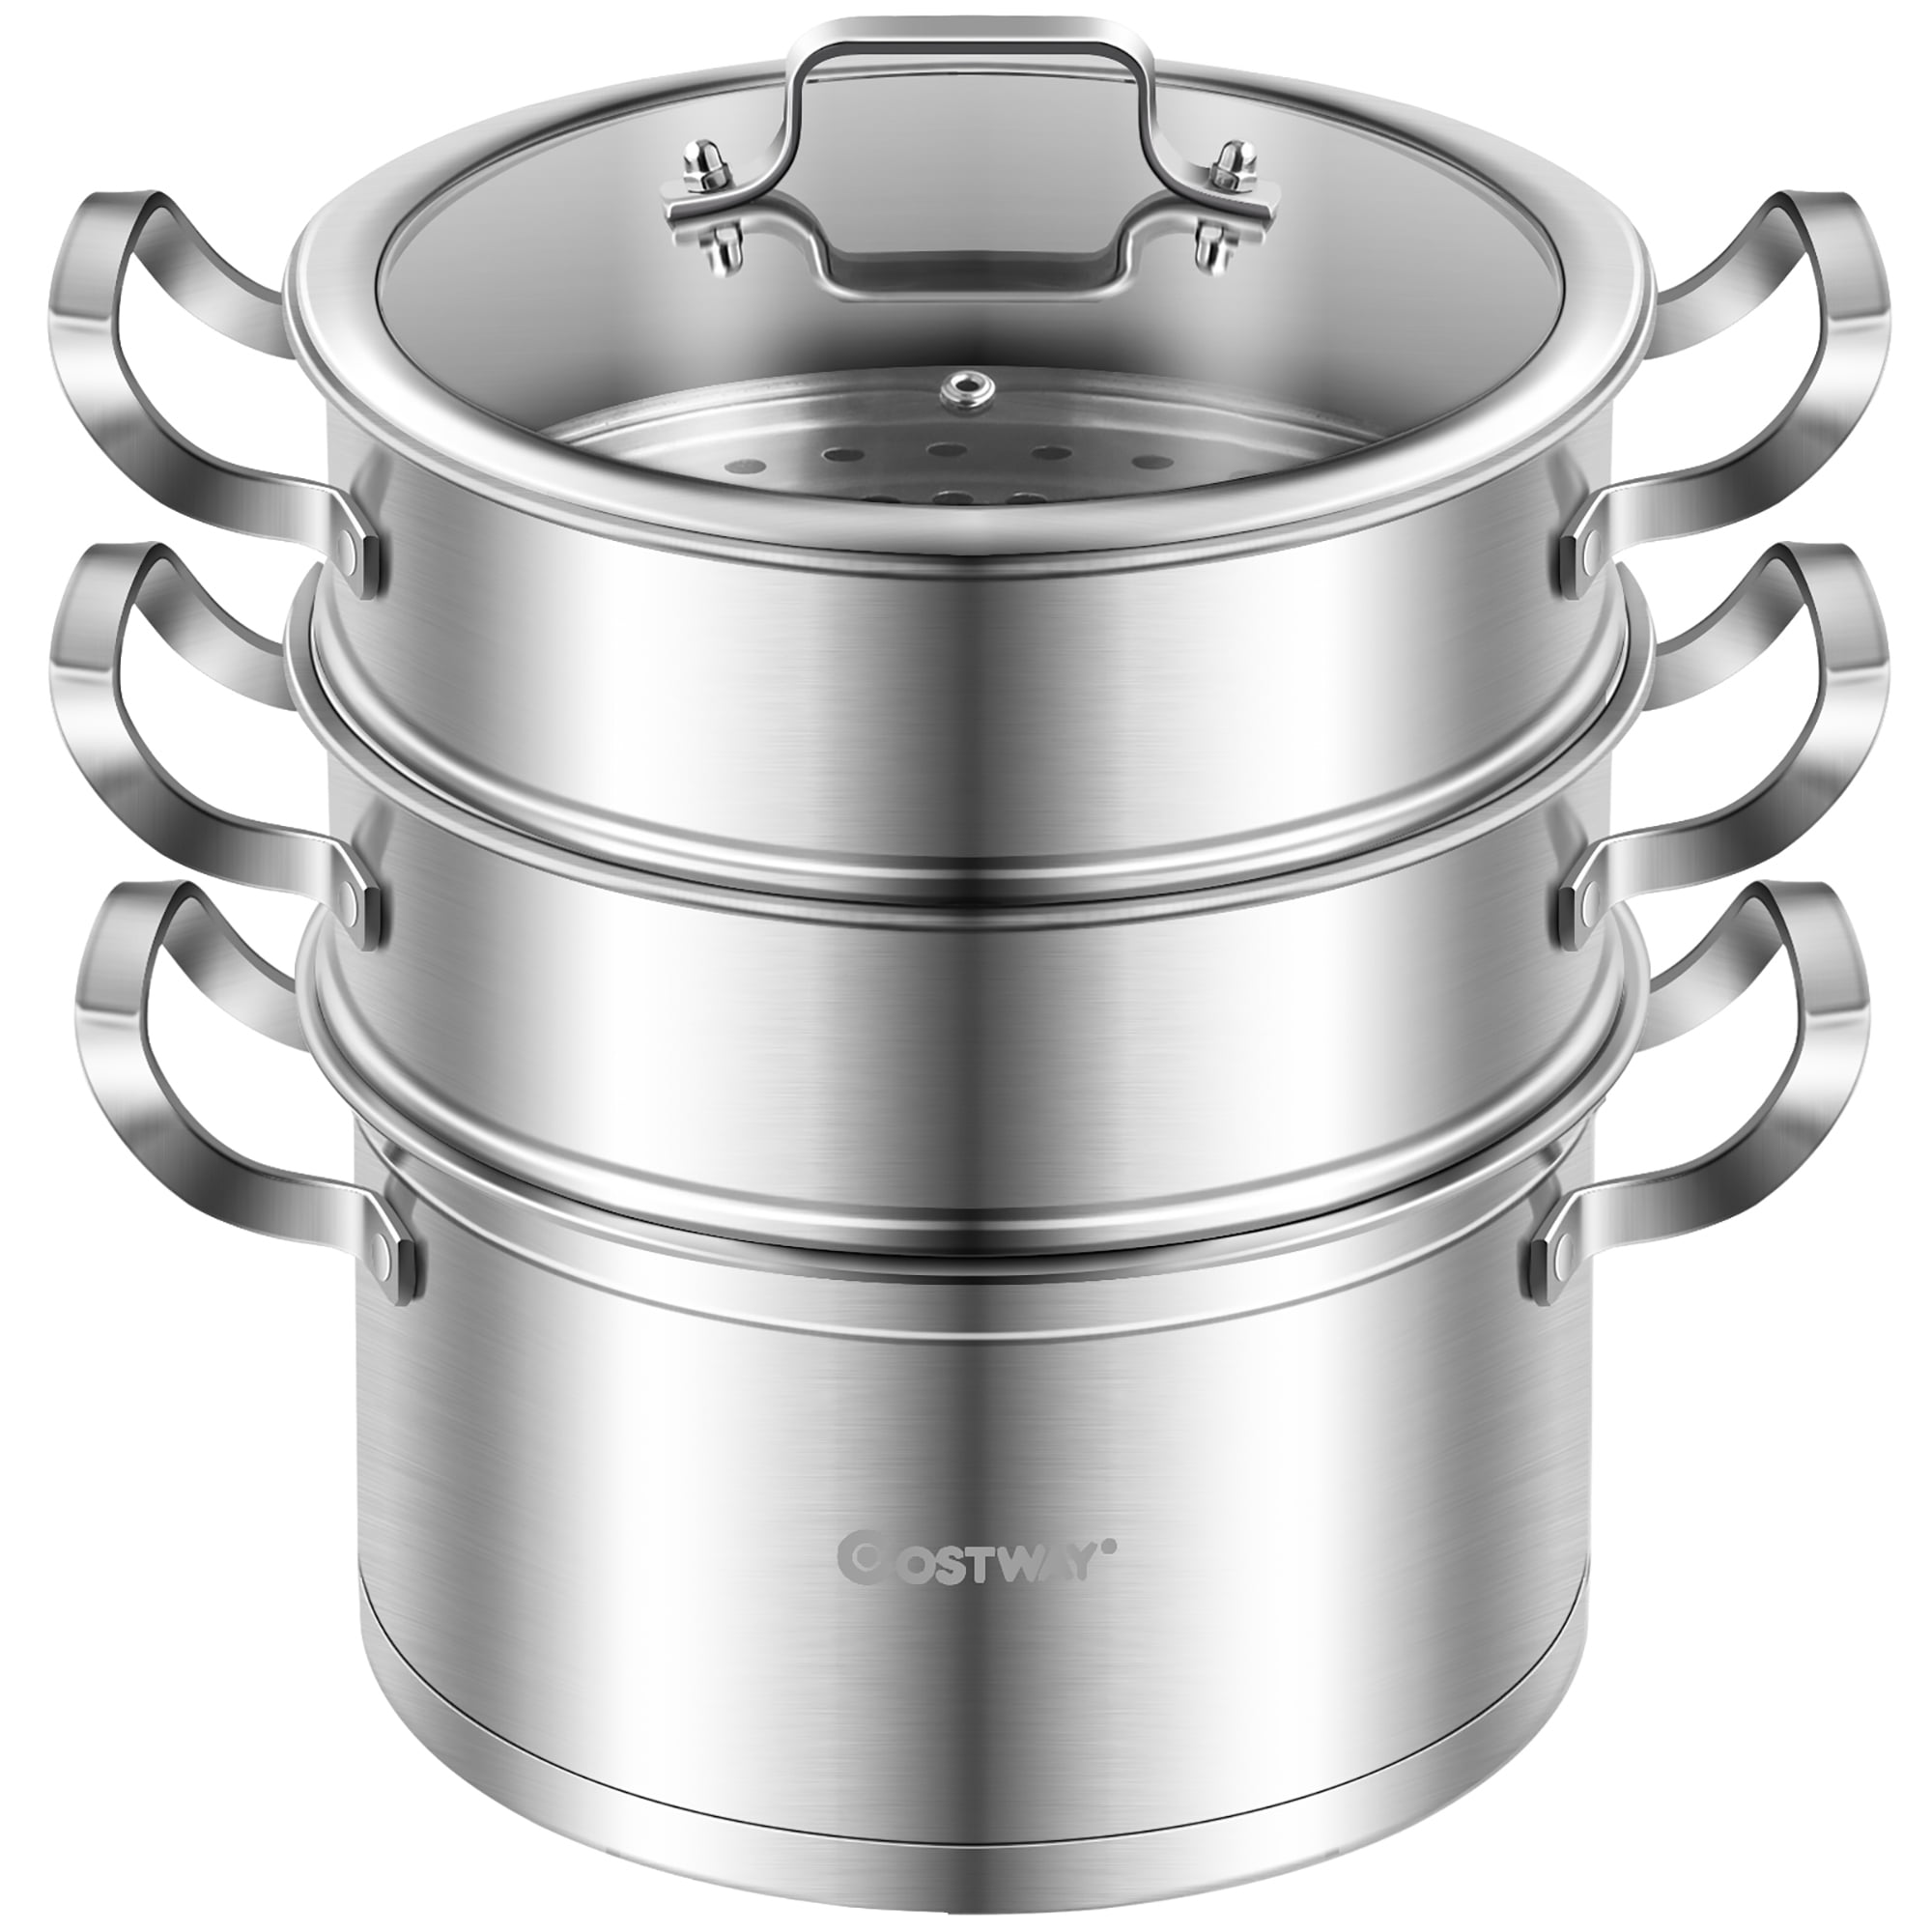 Available in 4 Sizes CONCORD 3 Tier Premium Stainless Steel Steamer Cookware 